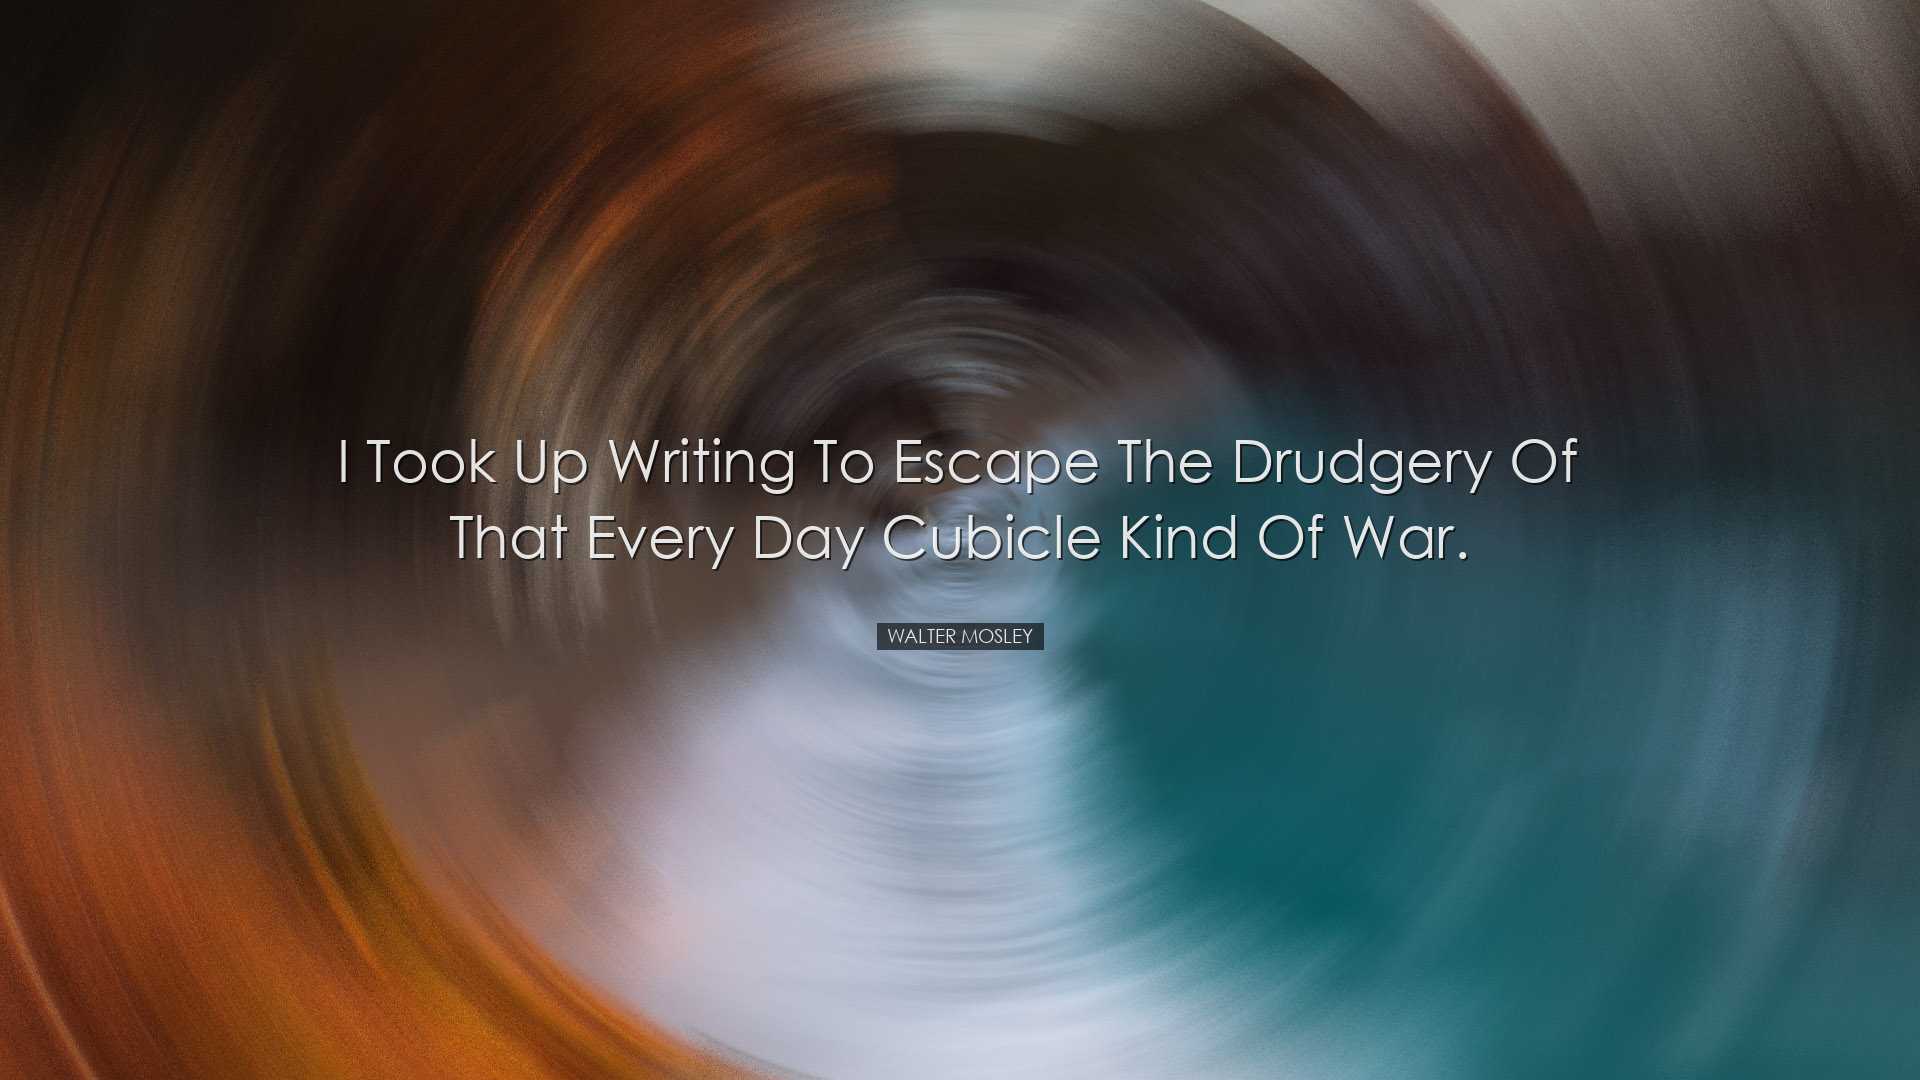 I took up writing to escape the drudgery of that every day cubicle